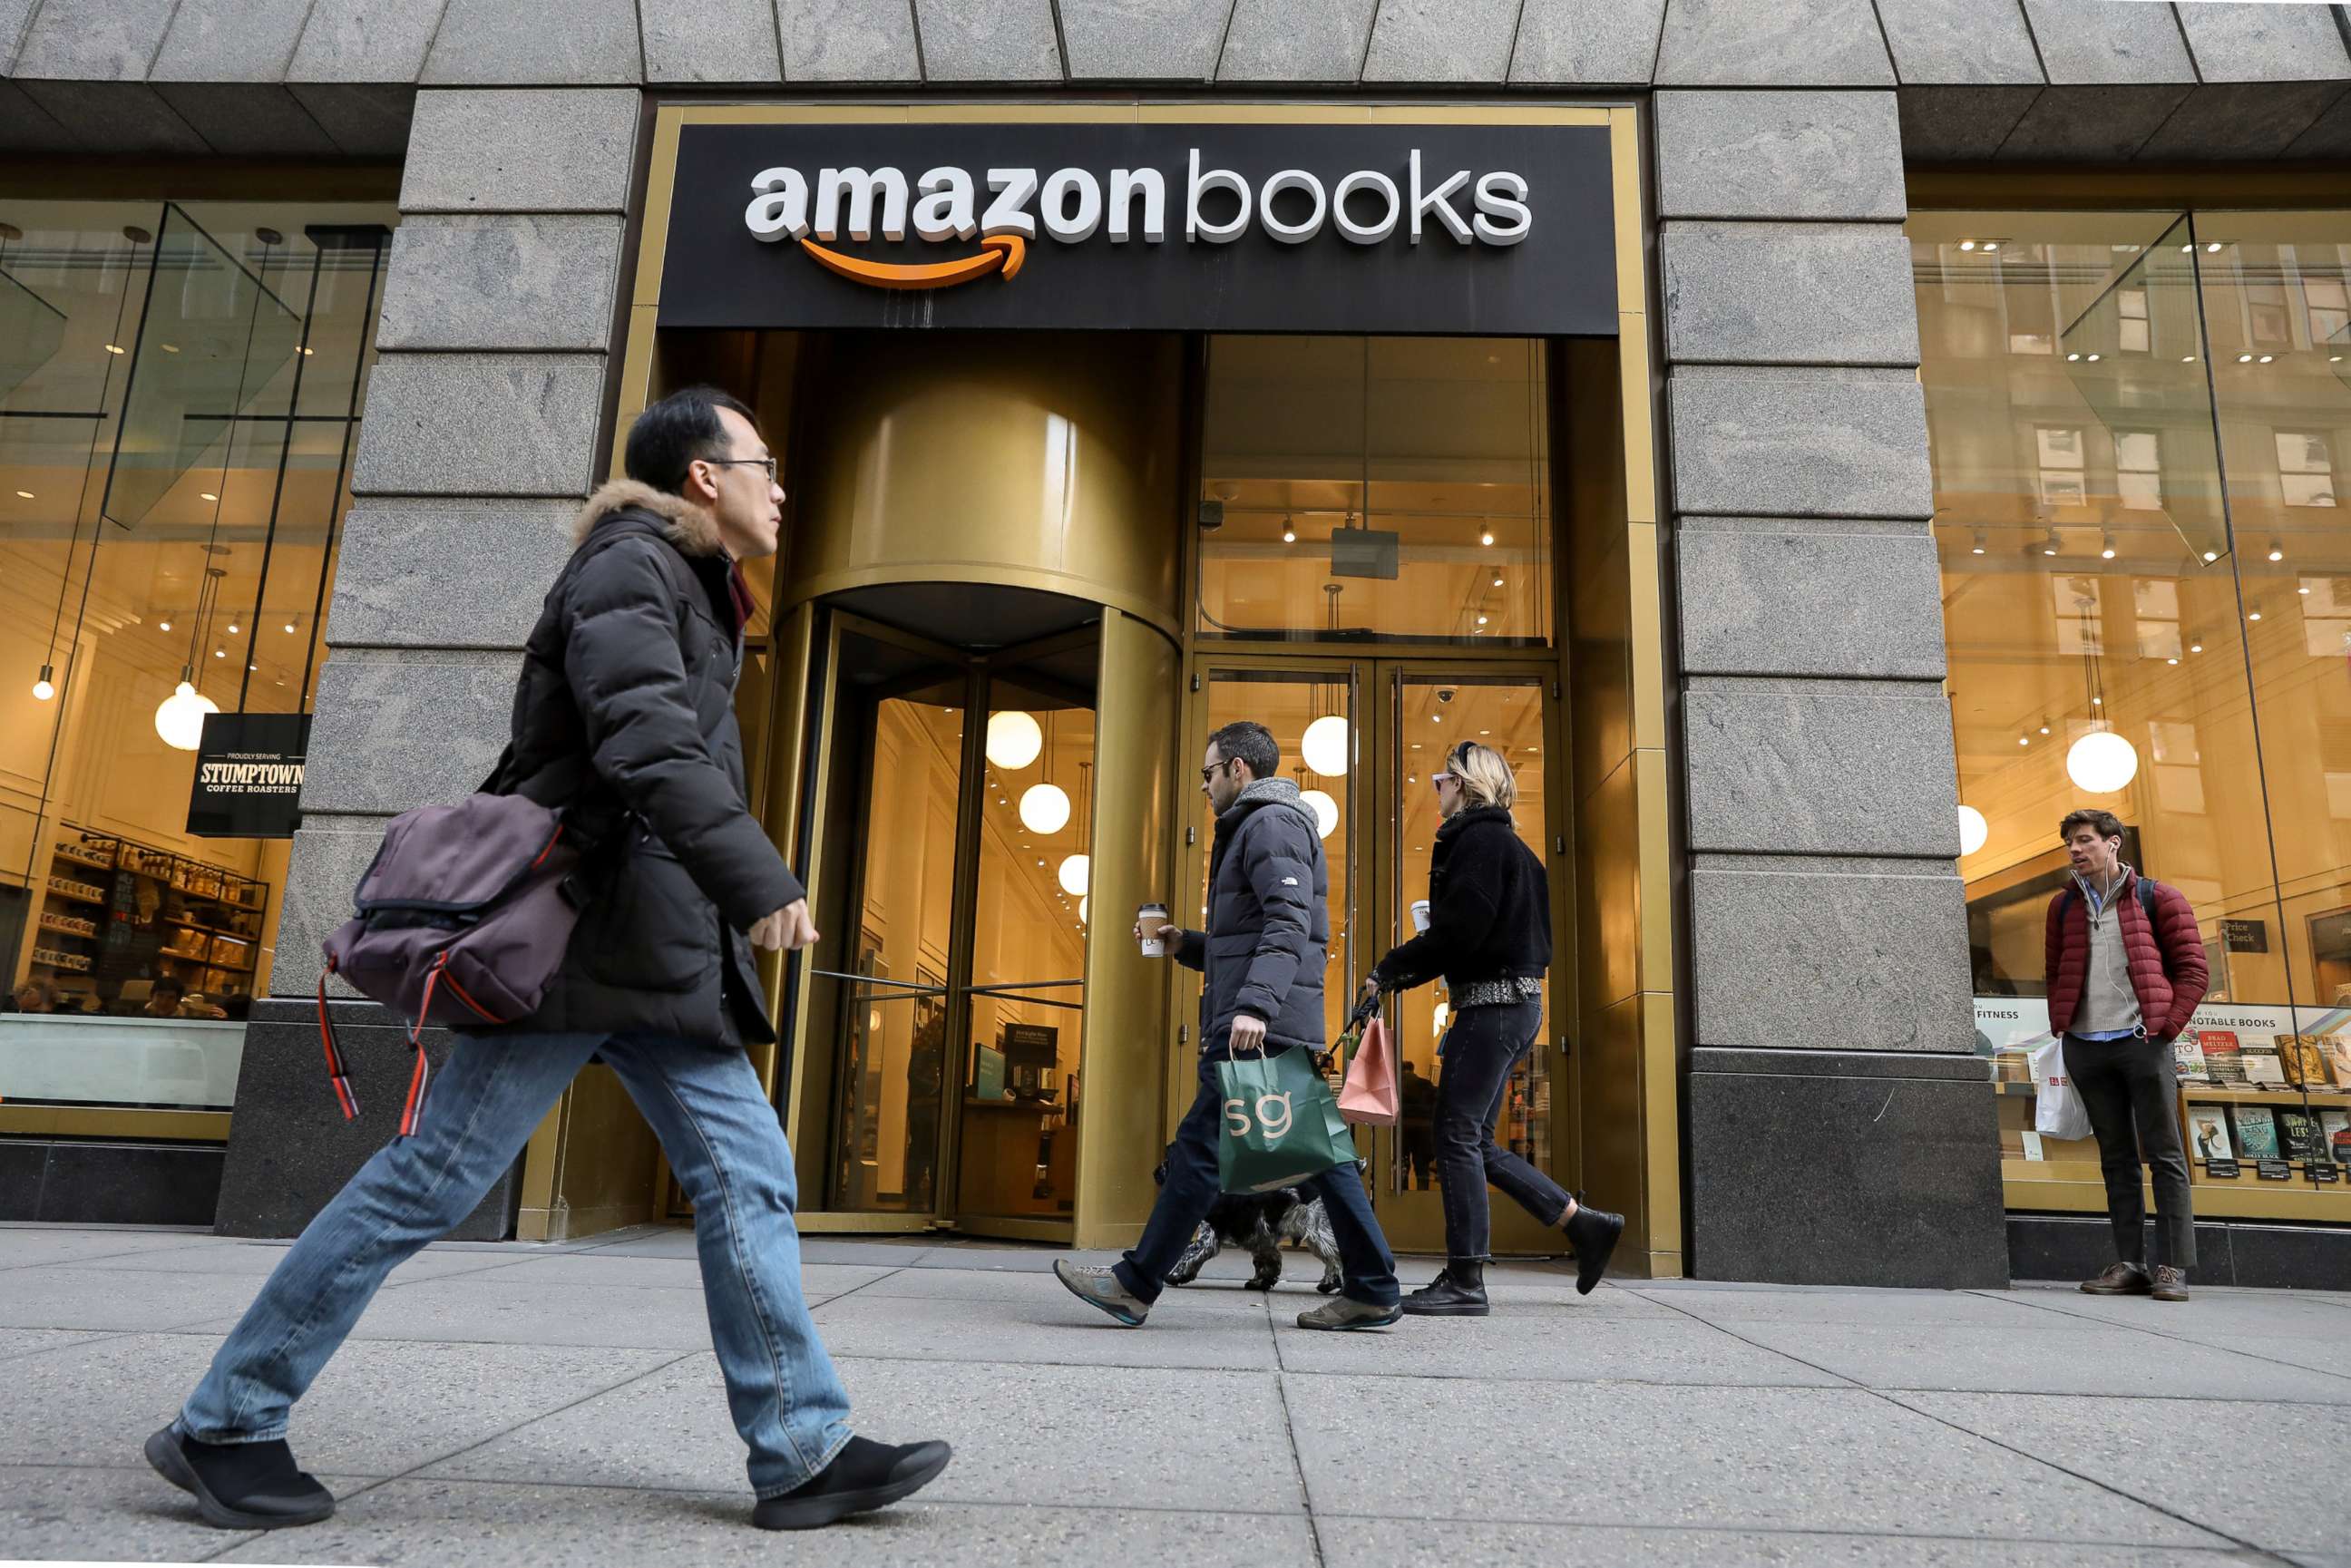 PHOTO: People walk past an Amazon Books retail store in New York, Feb.14, 2019.